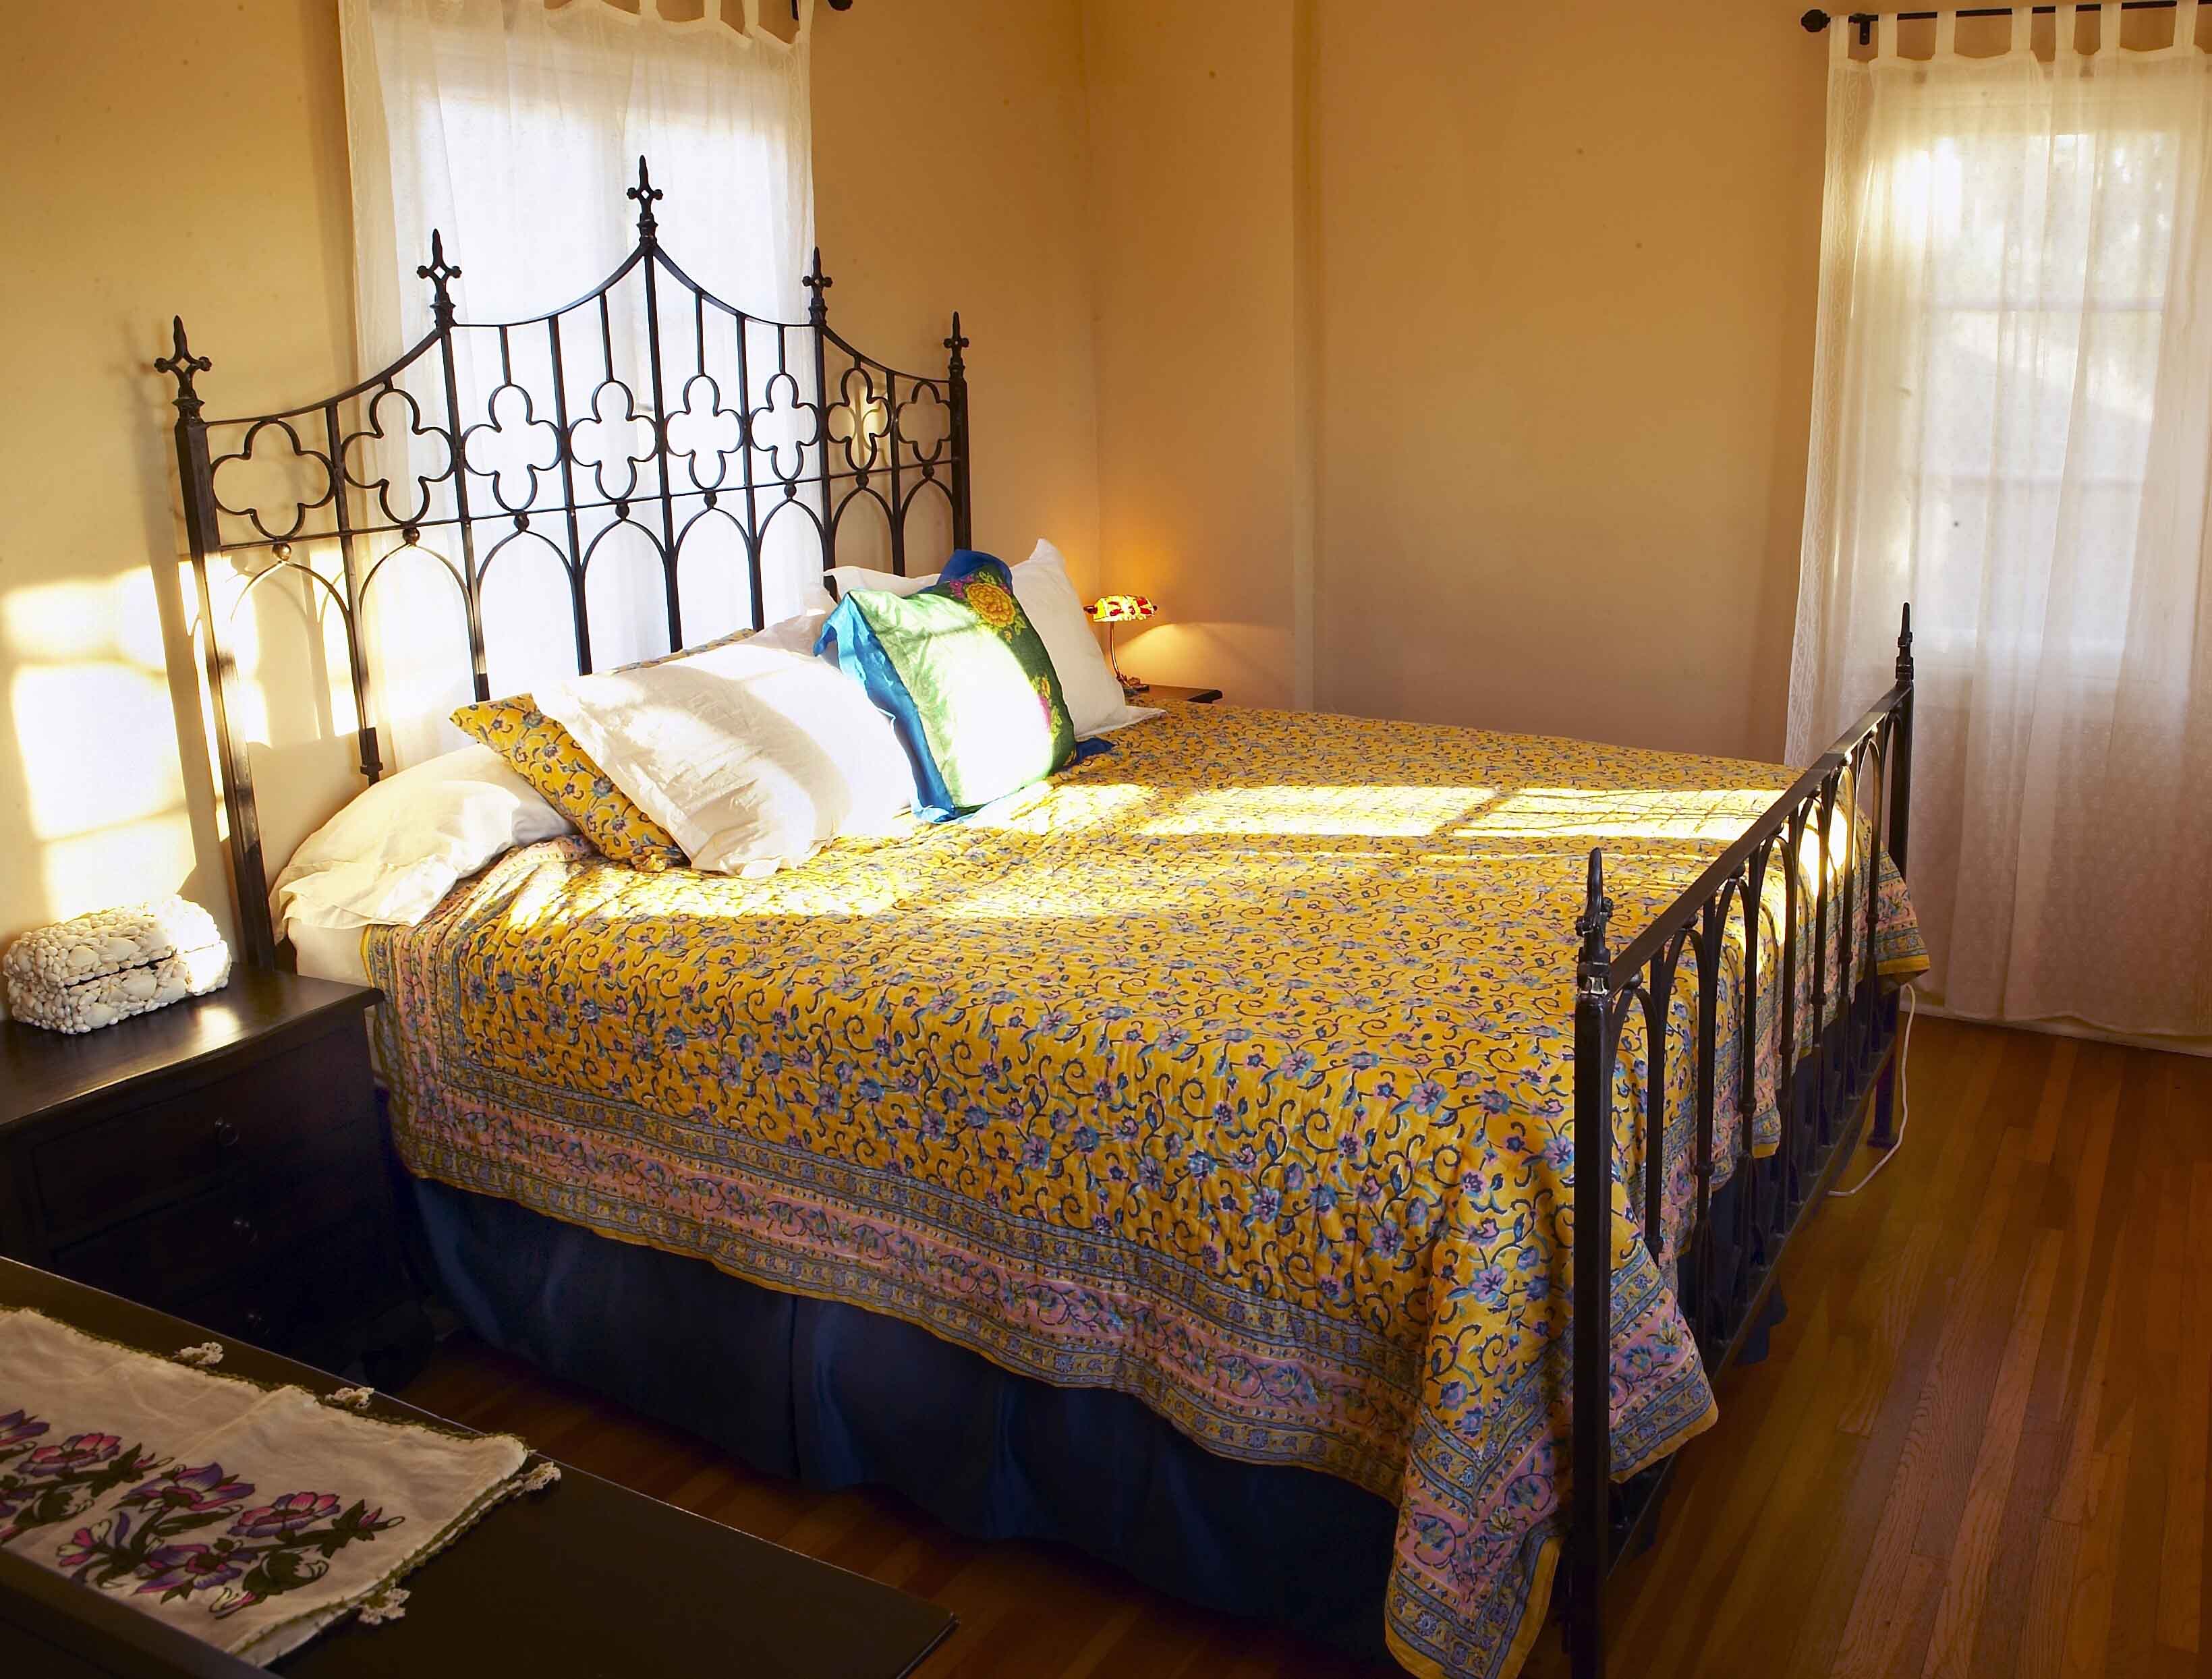 Wrought Iron Bed Ideas - We Love Metal Bed Frames : See more ideas about iron bed, wrought iron beds, bed.